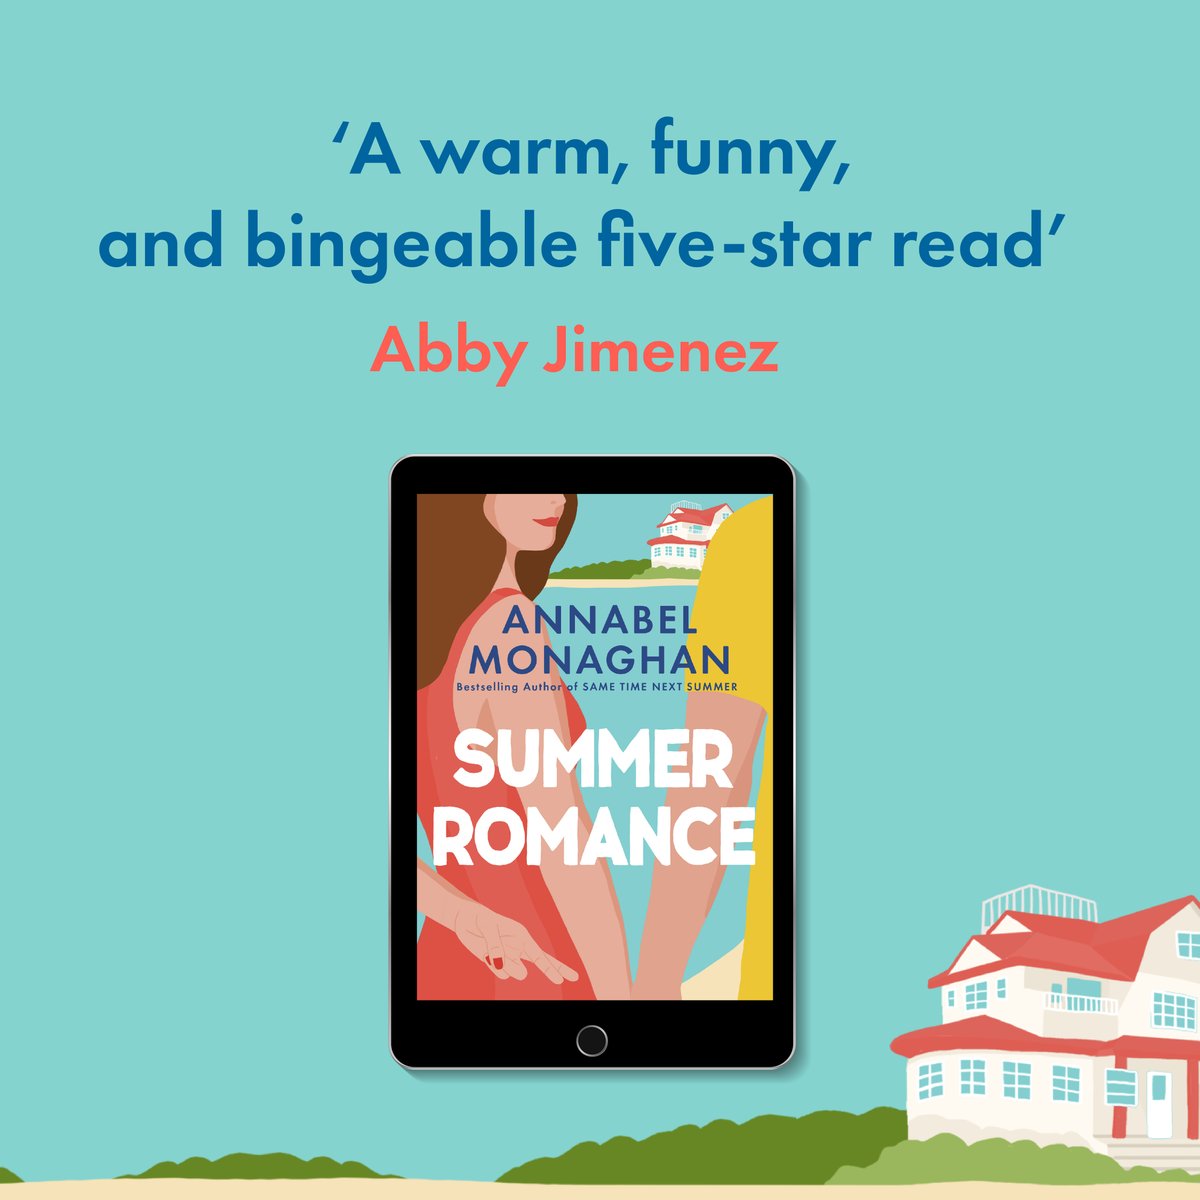 Benefits of a summer romance:
 1. It’s always fun
 2. It's always brief
 3. No one gets their heart broken.

#SummerRomance by @AnnabelMonaghan is coming in eBook this June! Pre-order your copy now 💛 amzn.to/3wLwQhs